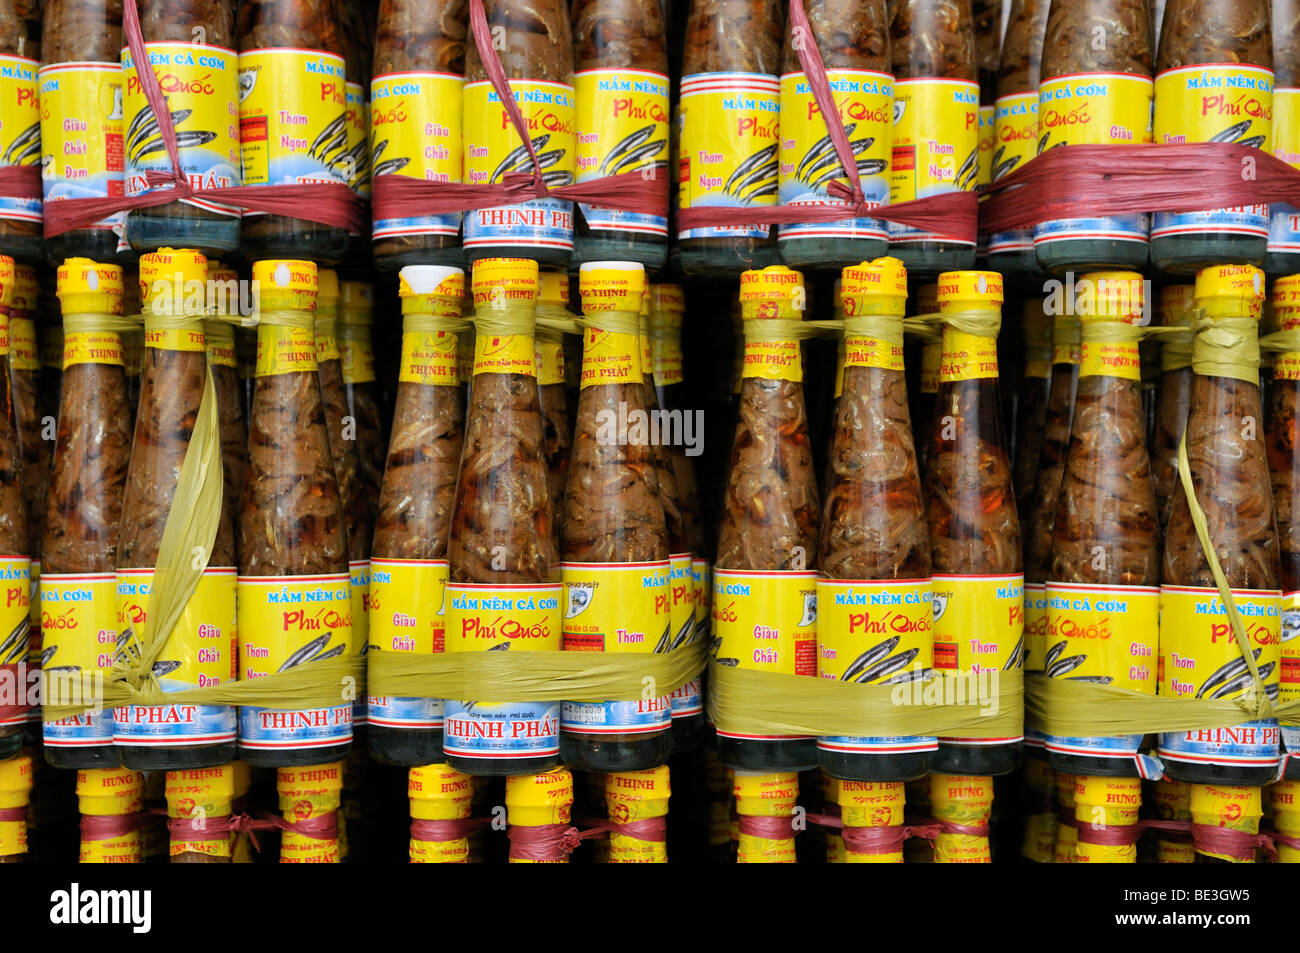 Shelf with the traditional Vietnamese fish sauce Nuoc Mam in glass bottles with yellow plastic cap, Phu Quoc, Vietnam, Asia Stock Photo